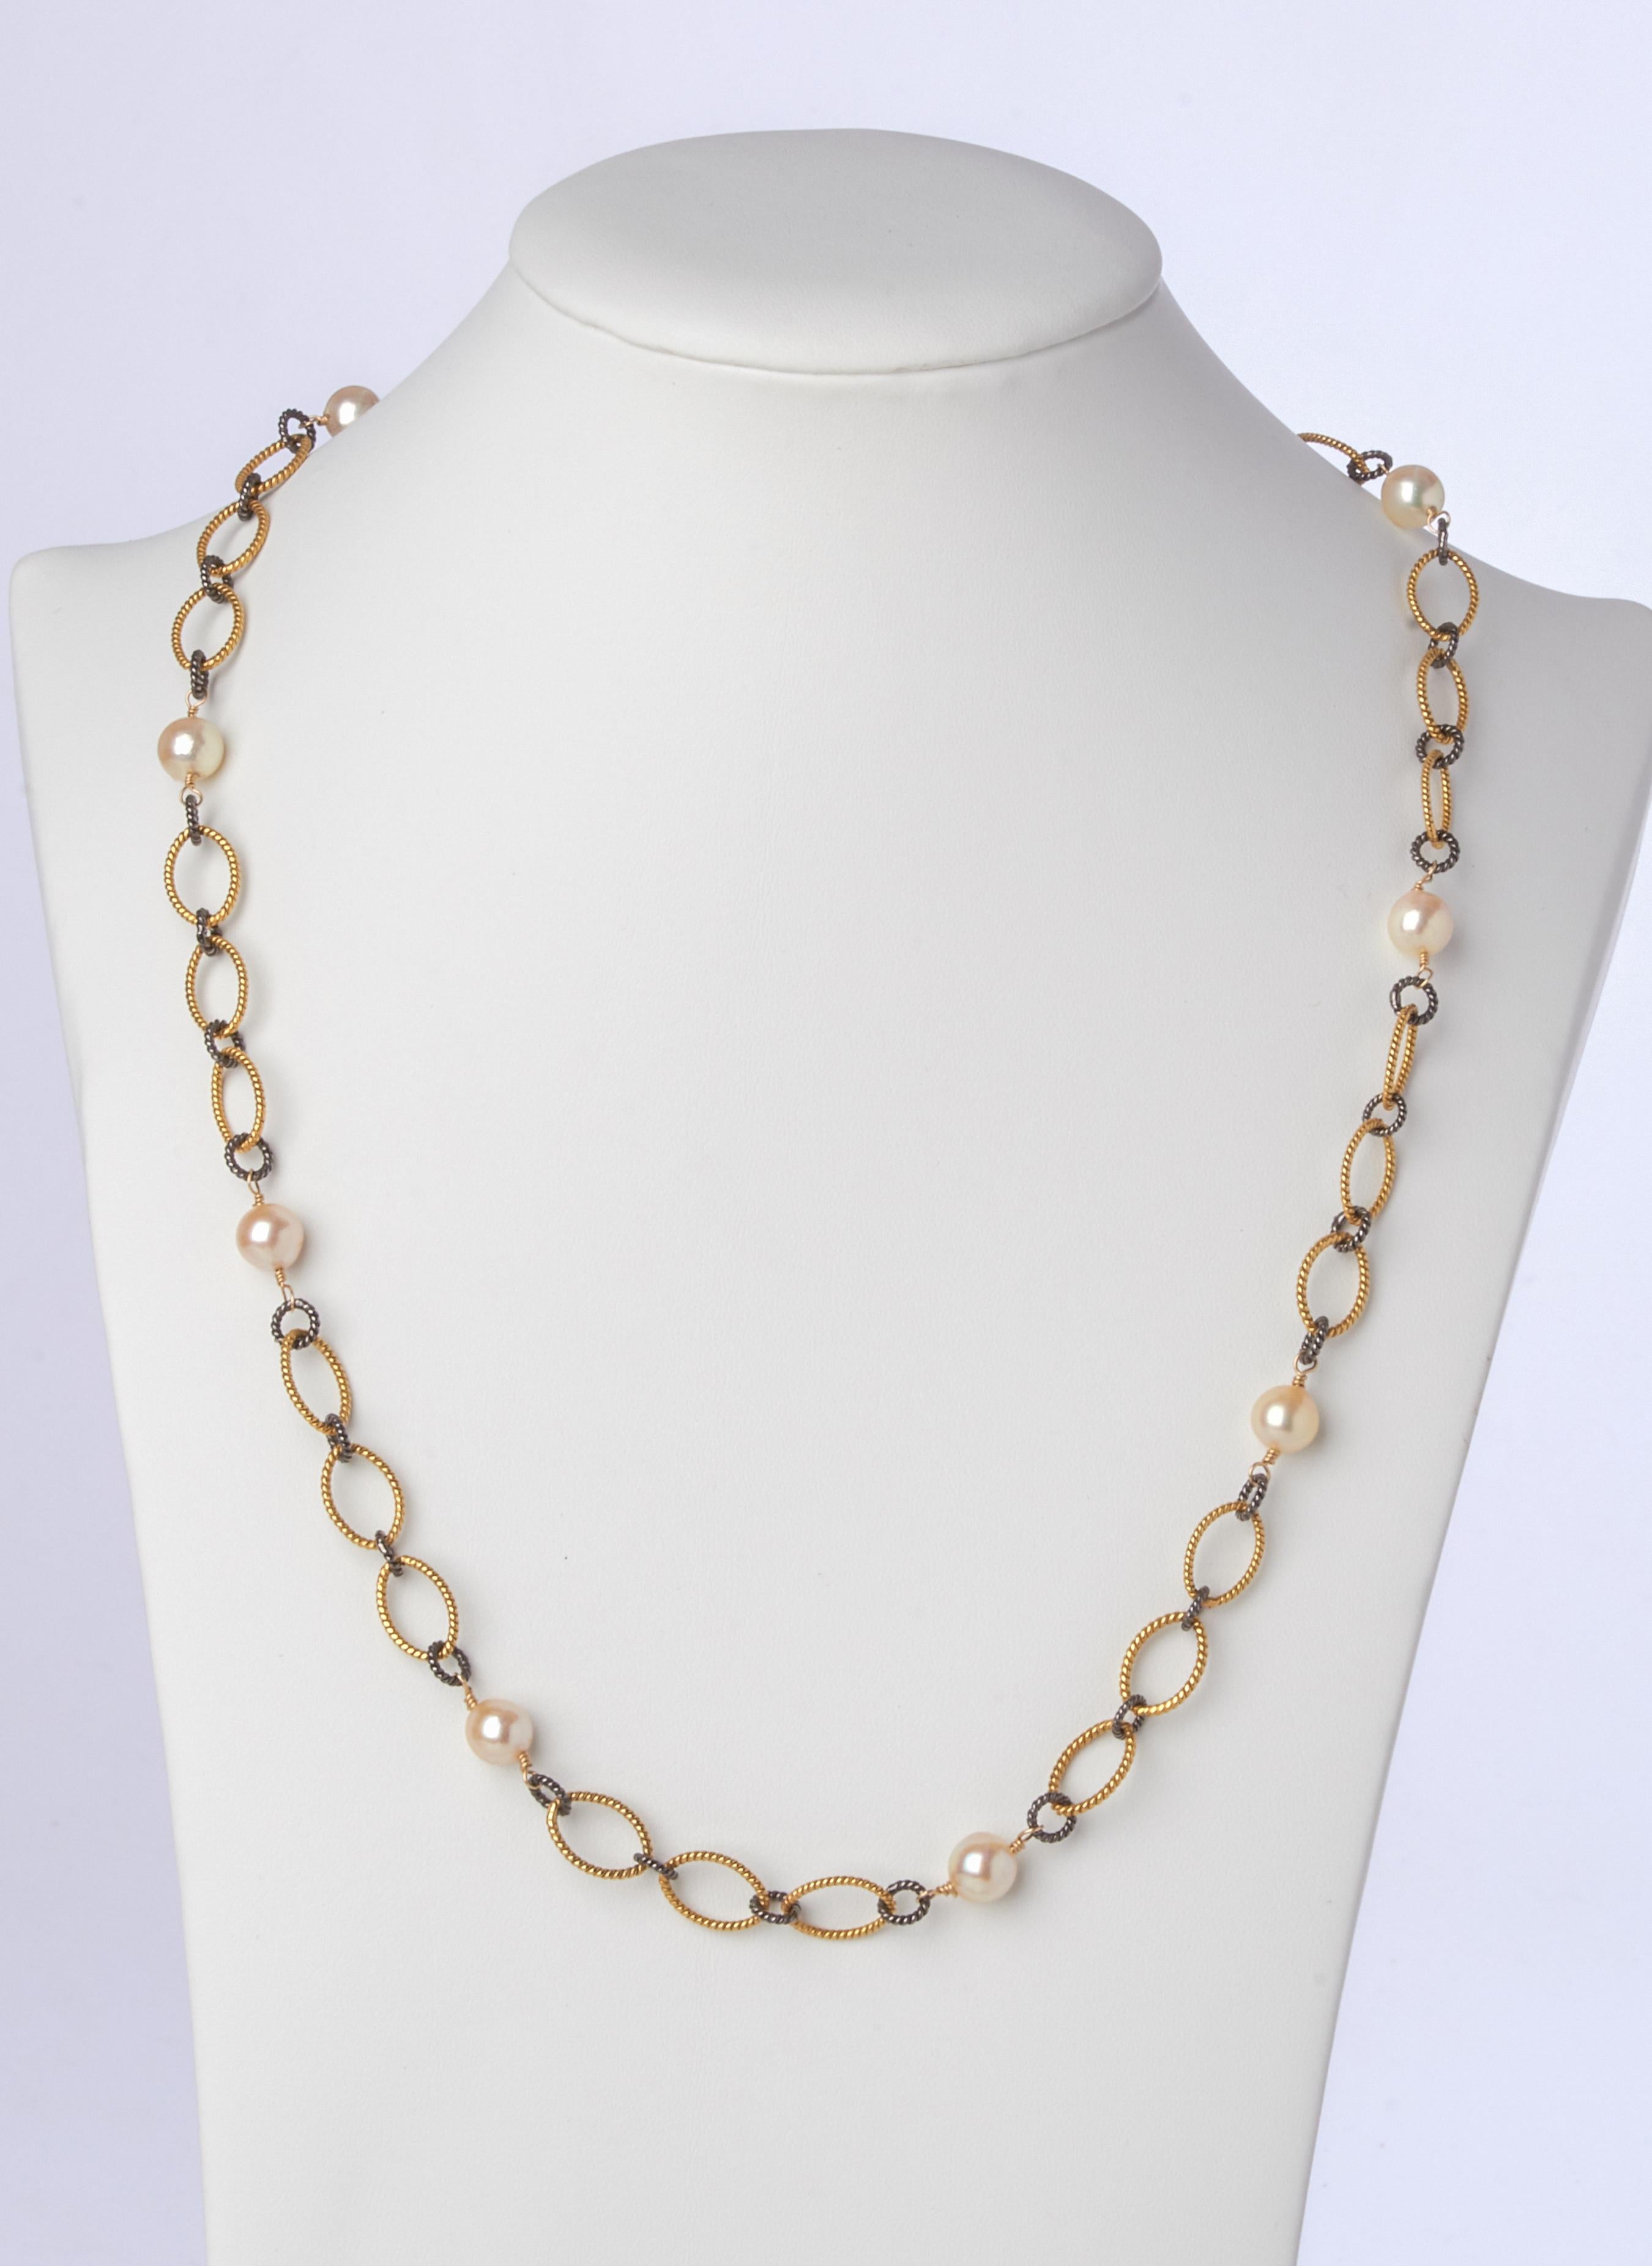 Round Cut Vermeil & Oxidized Silver Open Link Chain Necklace w Akoya Pearls For Sale